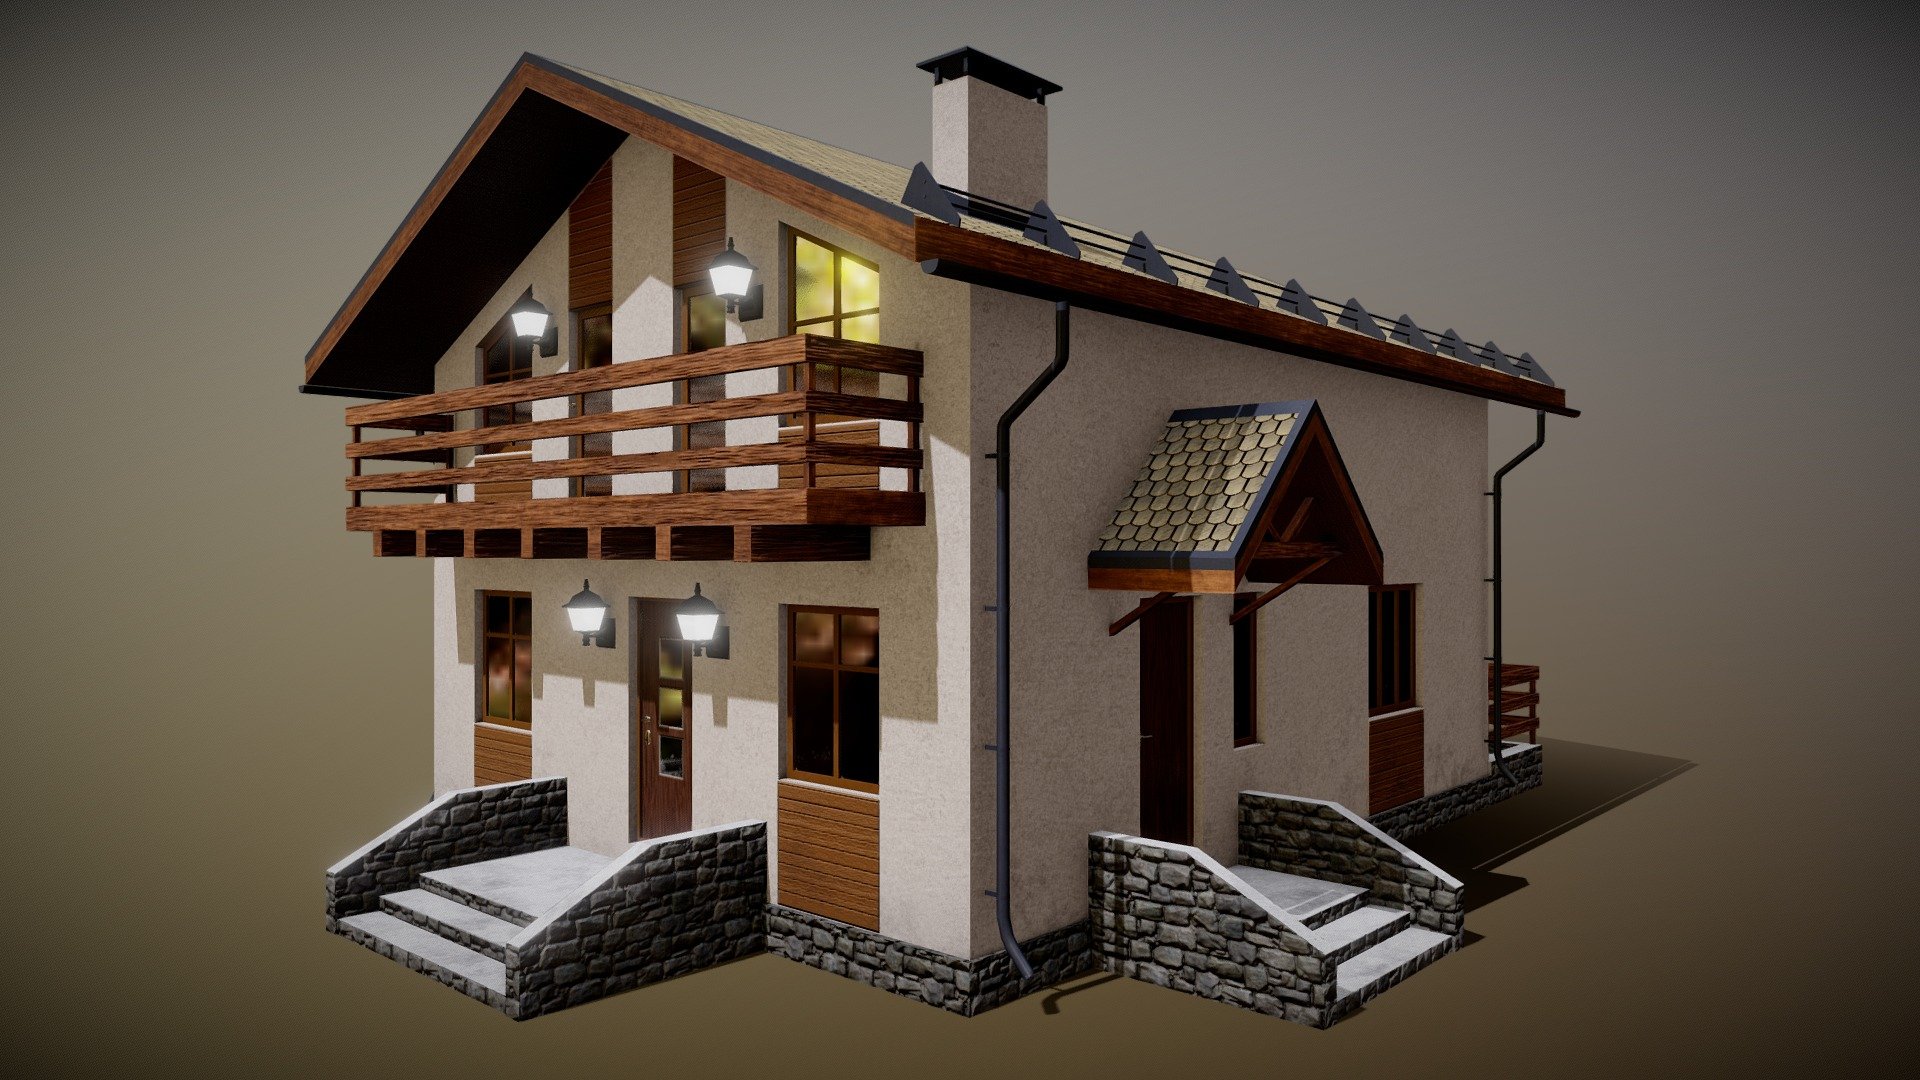 Hello!  

I am happy to present you Cottage 2 3d model.

You can buy that model at CGTrader website

Ready for game-development, render and animation!  




Native file format: Blender 2.79

Converted file formats: 3ds Max 2017, Cinema 4D R16, UnityPackage, .FBX, .OBJ.

2.800 faces total (Only Quads and Tris topology used).

TEXTURES: 




Base_Color.png (4096x4096px) 

Normal.png (4096x4096px) 

Metallic.png (4096x4096px) 

Roughness.png (4096x4096px) 

Height.png (4096x4096px) 

AO.png (4096x4096px) 

Emission.png (4096x4096px) 

Windows_mask.png (4096x4096px)

MetallicSmoothness.png (4096x4096px)

DESCRIPTION: 




Model is fully textured with all materials applied (Converted formats .MAX, .C4D, .Unitypackage as well). 

LowPoly model, that is perfect for even mobile game-dev. 

PBR materials, as you can see on the preview. 

Formats .MAX, .C4D, .OBJ, .FBX, Unitypackage are included. 

Gerhald3D - Low-Poly PBR Cottage 2 - 3D model by Gerhald 3d model